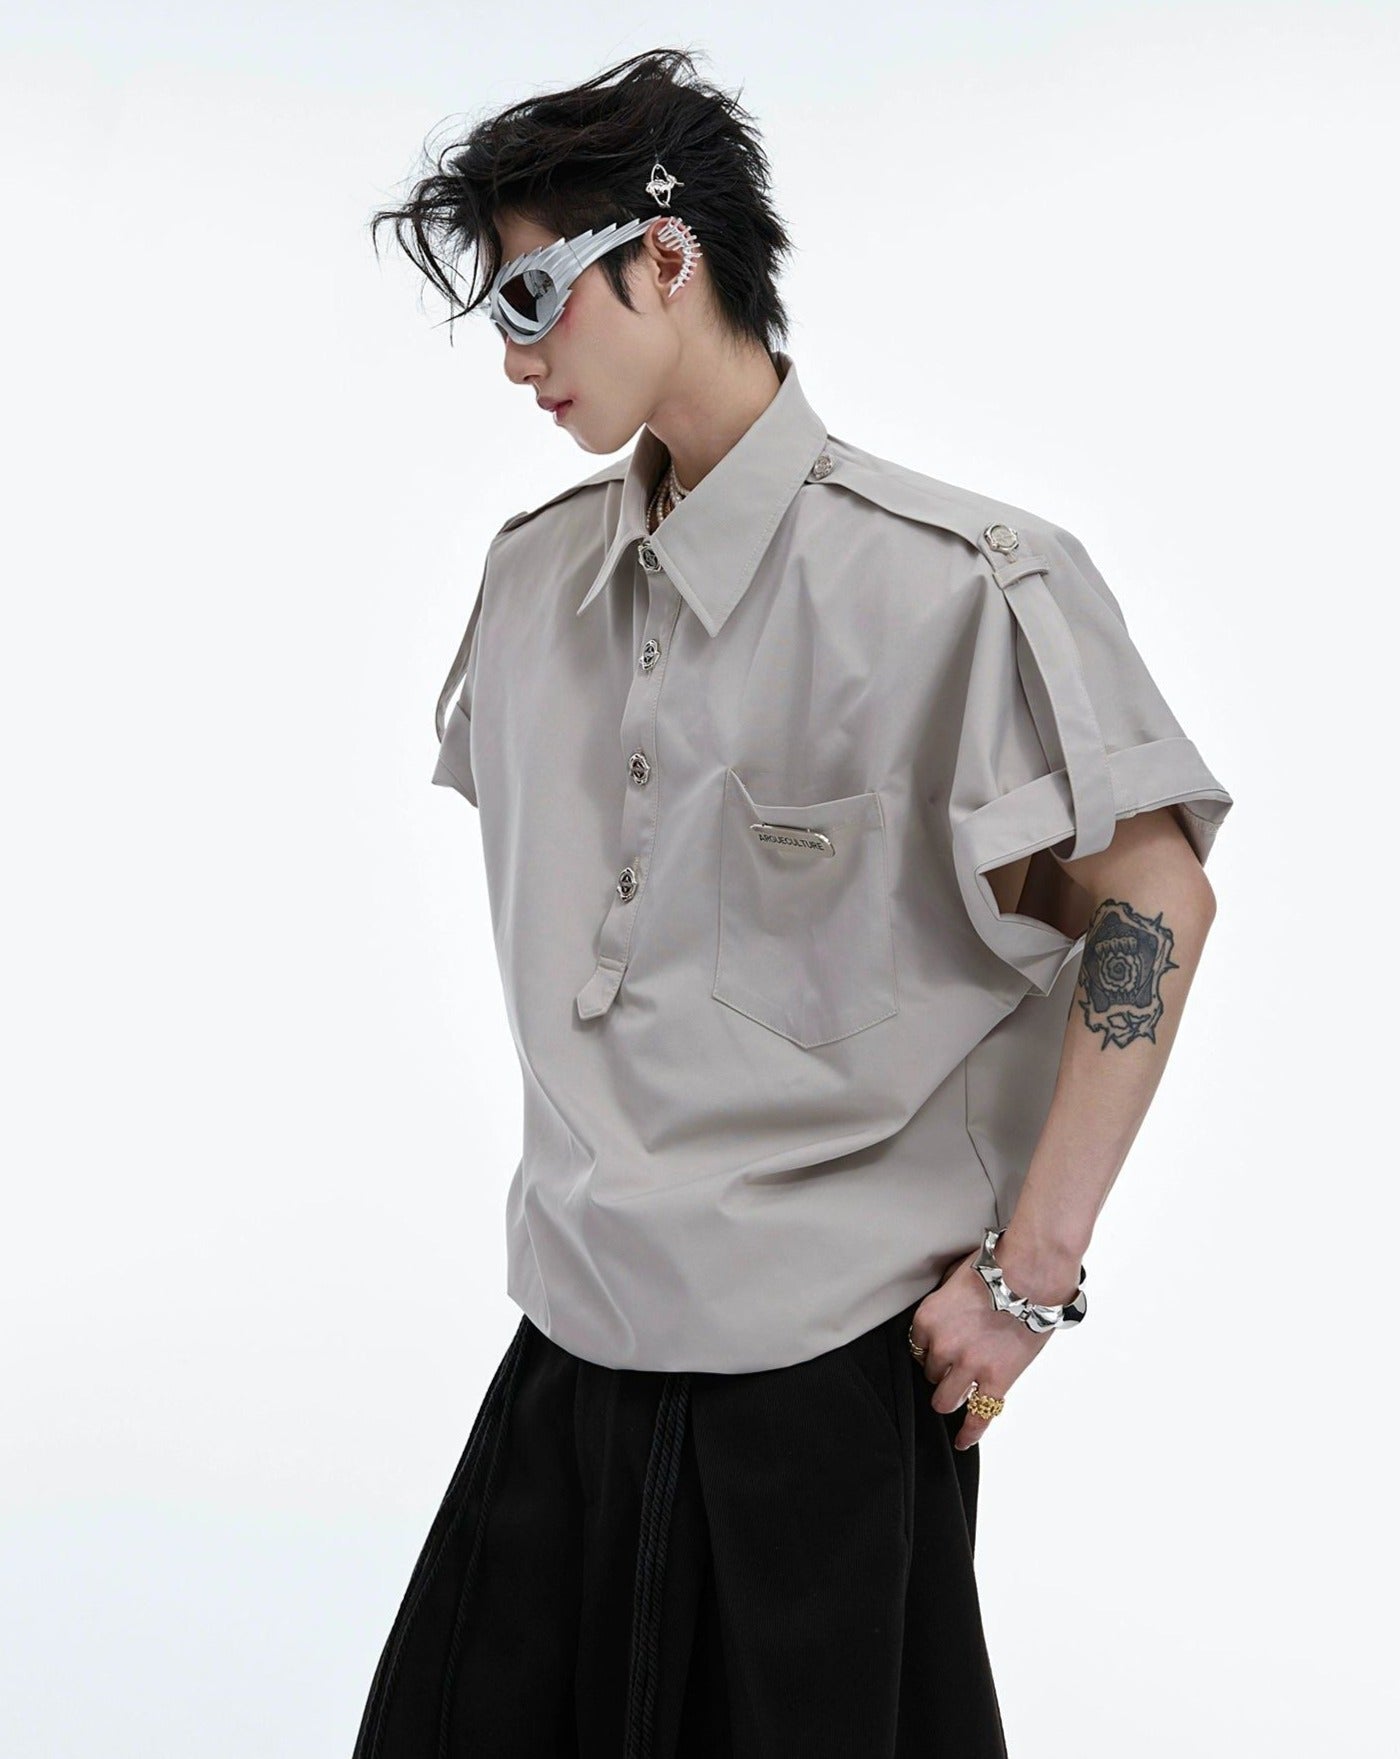 Folded Sleeve Boxy Shirt Korean Street Fashion Shirt By Argue Culture Shop Online at OH Vault